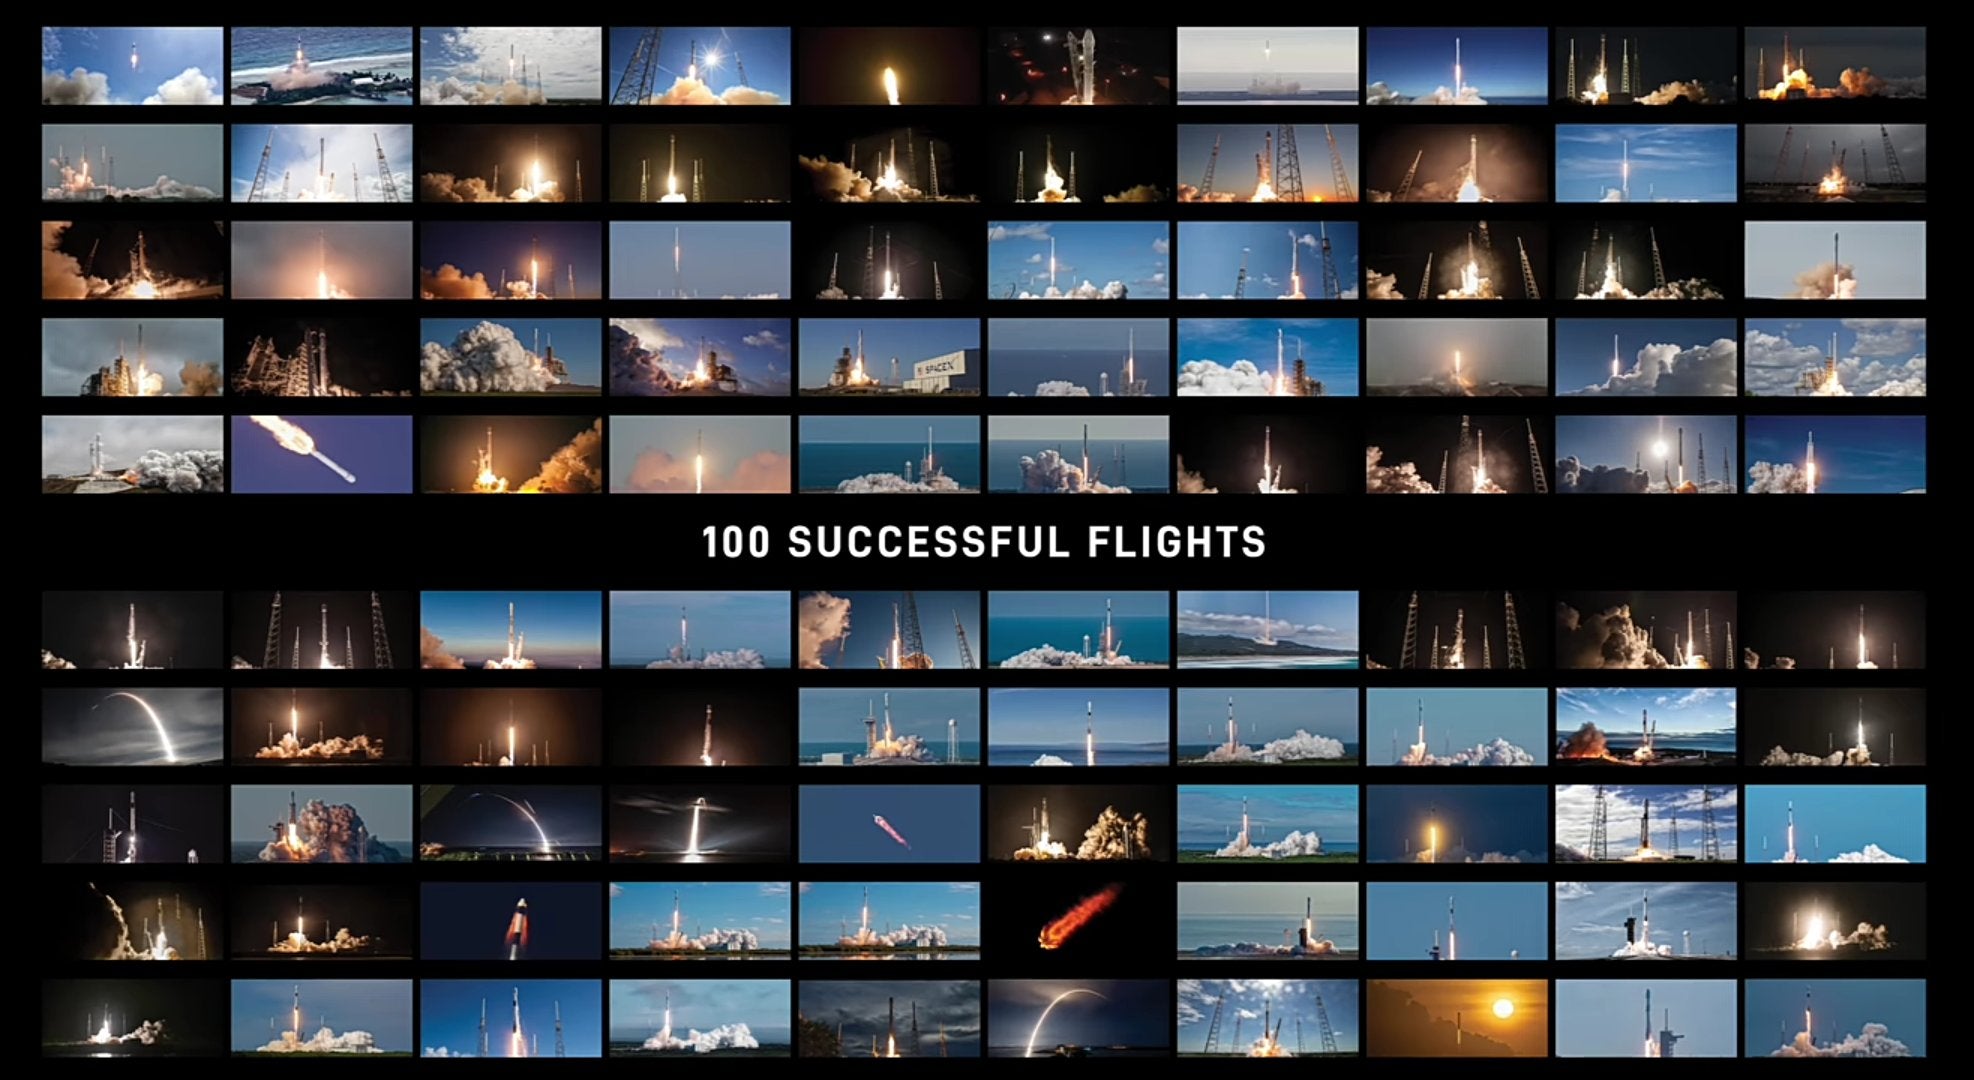 SpaceX makes history with 100 successful rocket flights!